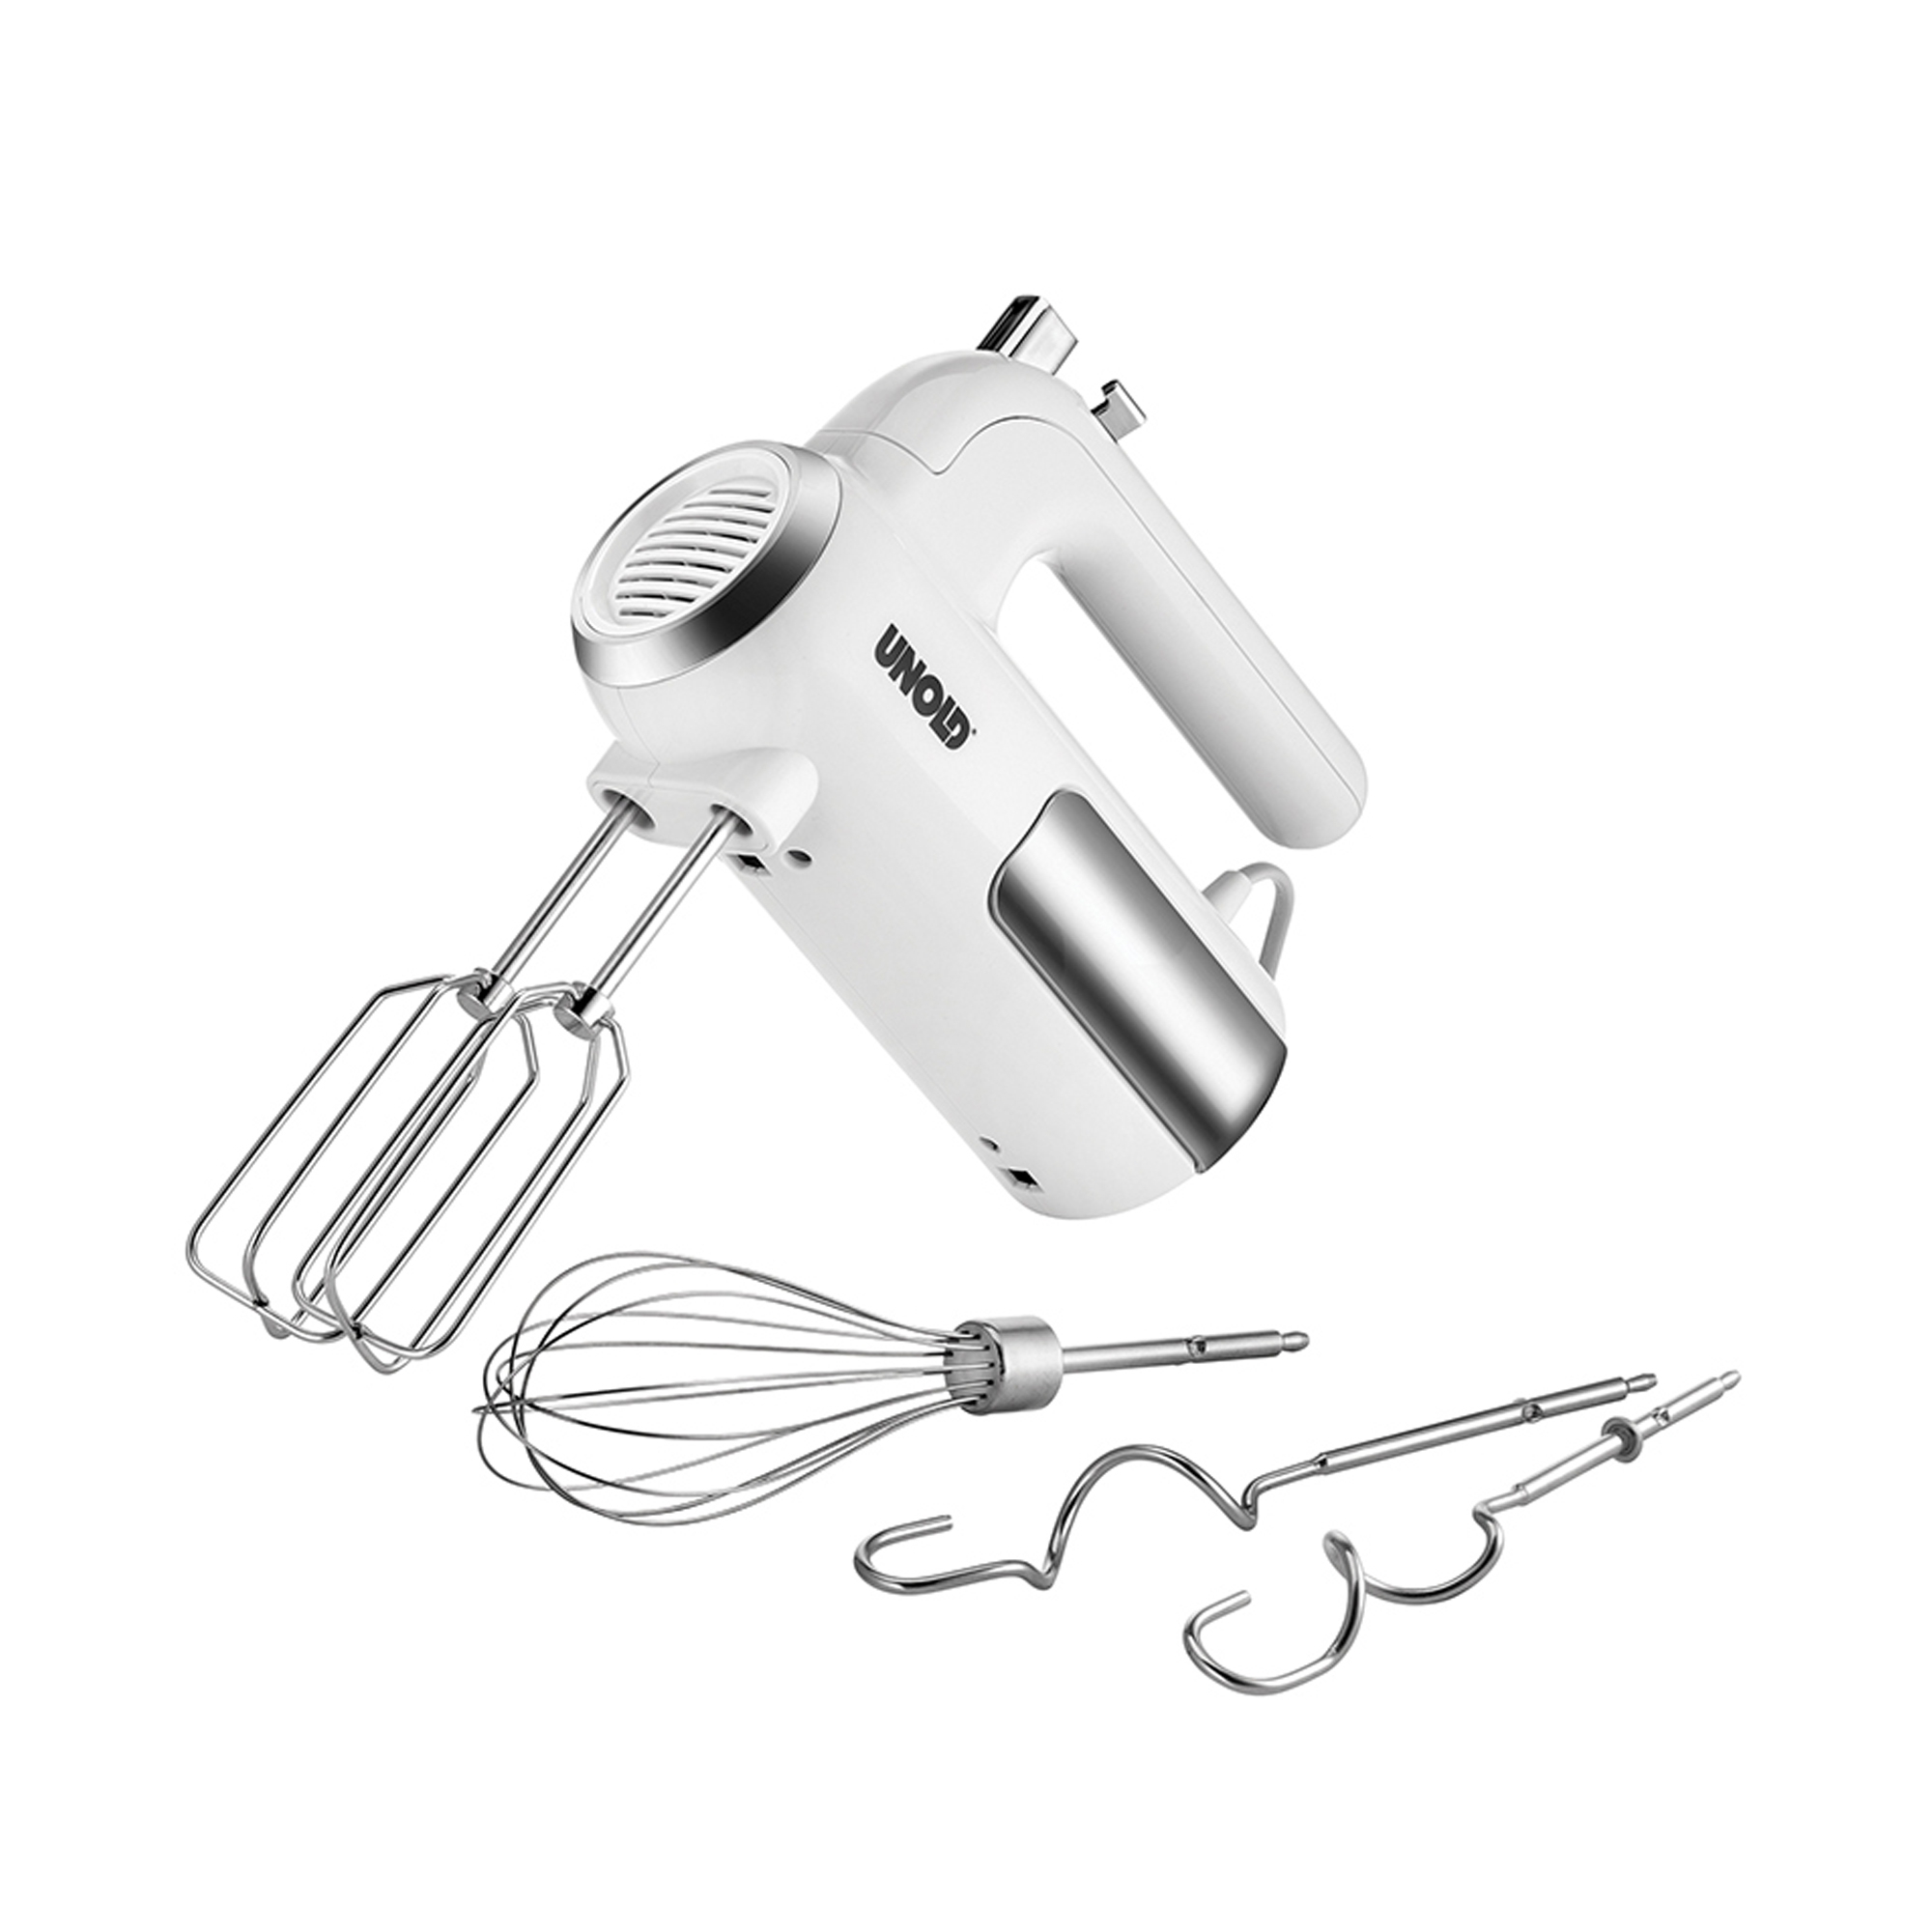 Unold - Hand mixer 3 in 1